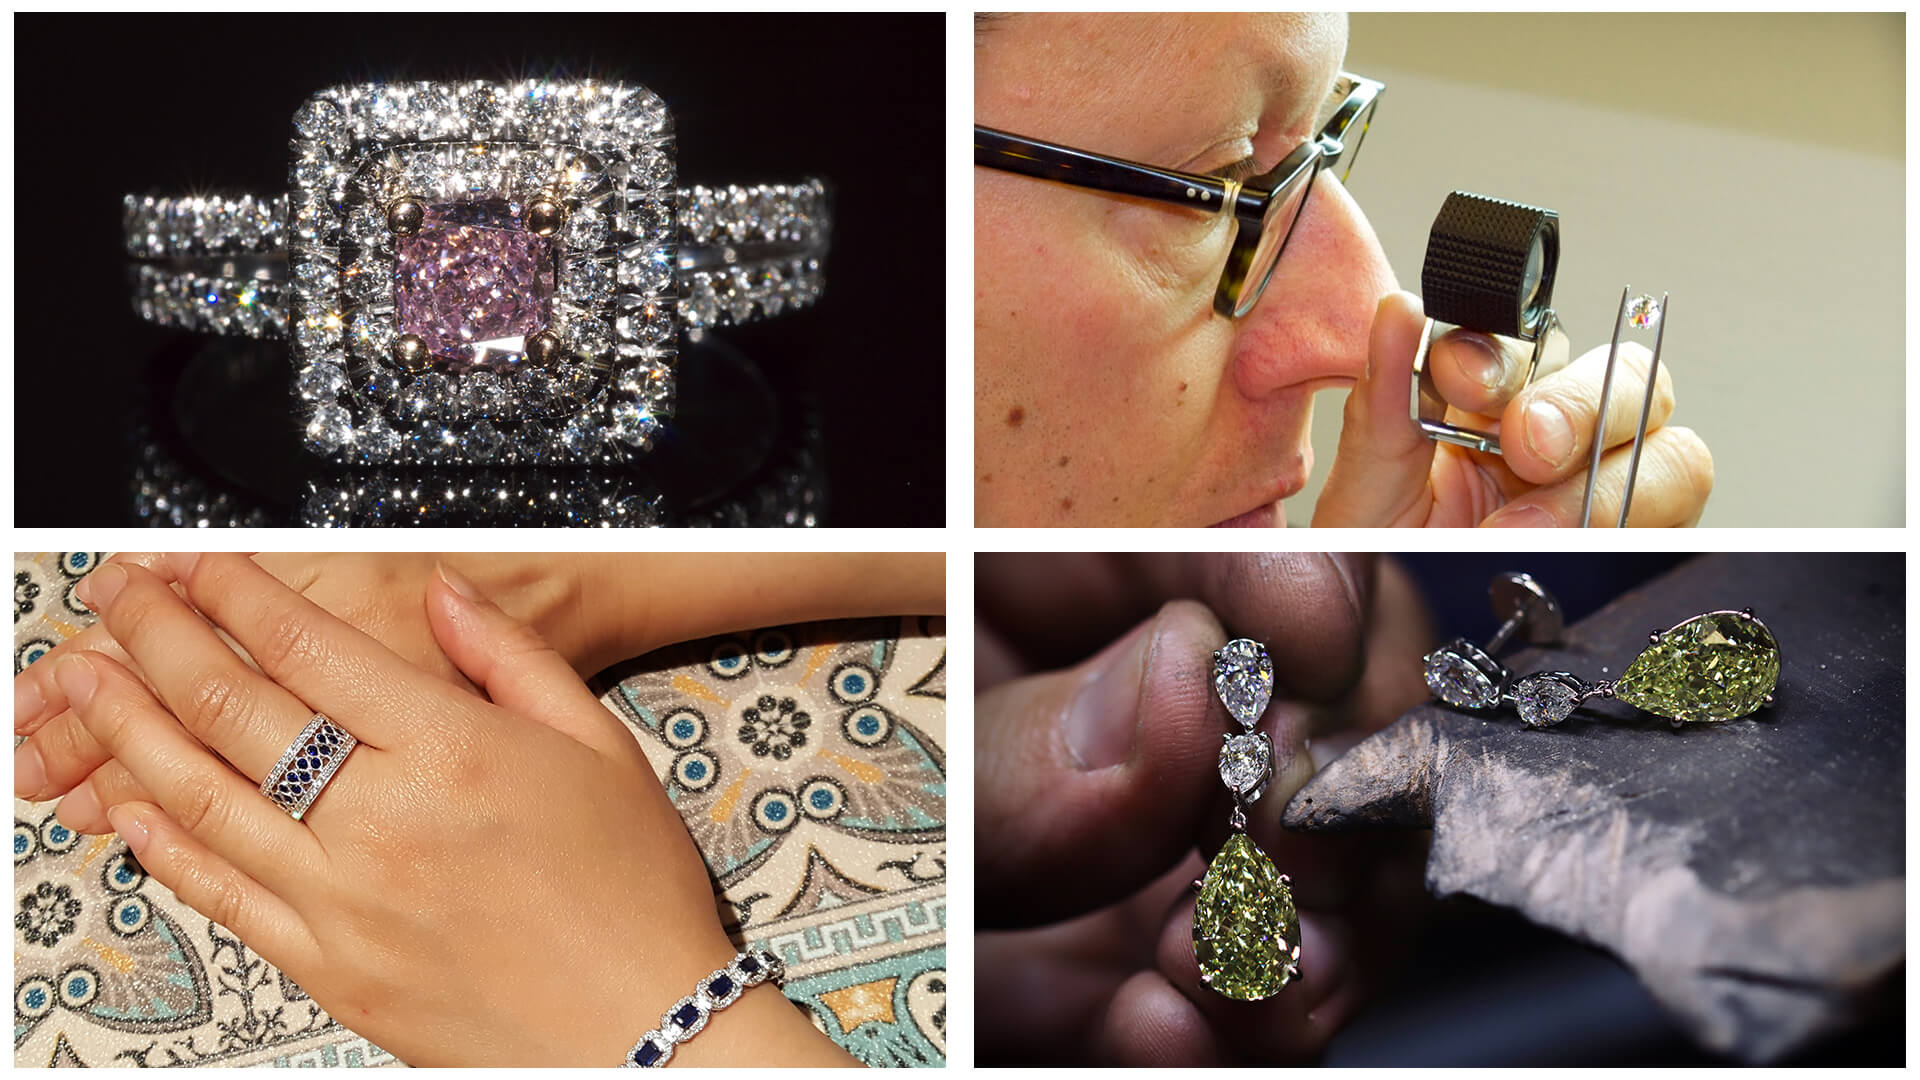 College of four images.. Top left: diamond ring against a black background. Top right: expert goldsmith looking at a diamond with an eyeglass. Bottom left,: woman's hands modelling a ring and matching bracelet. Bottom right: closeup of goldsmith holding diamond earrings